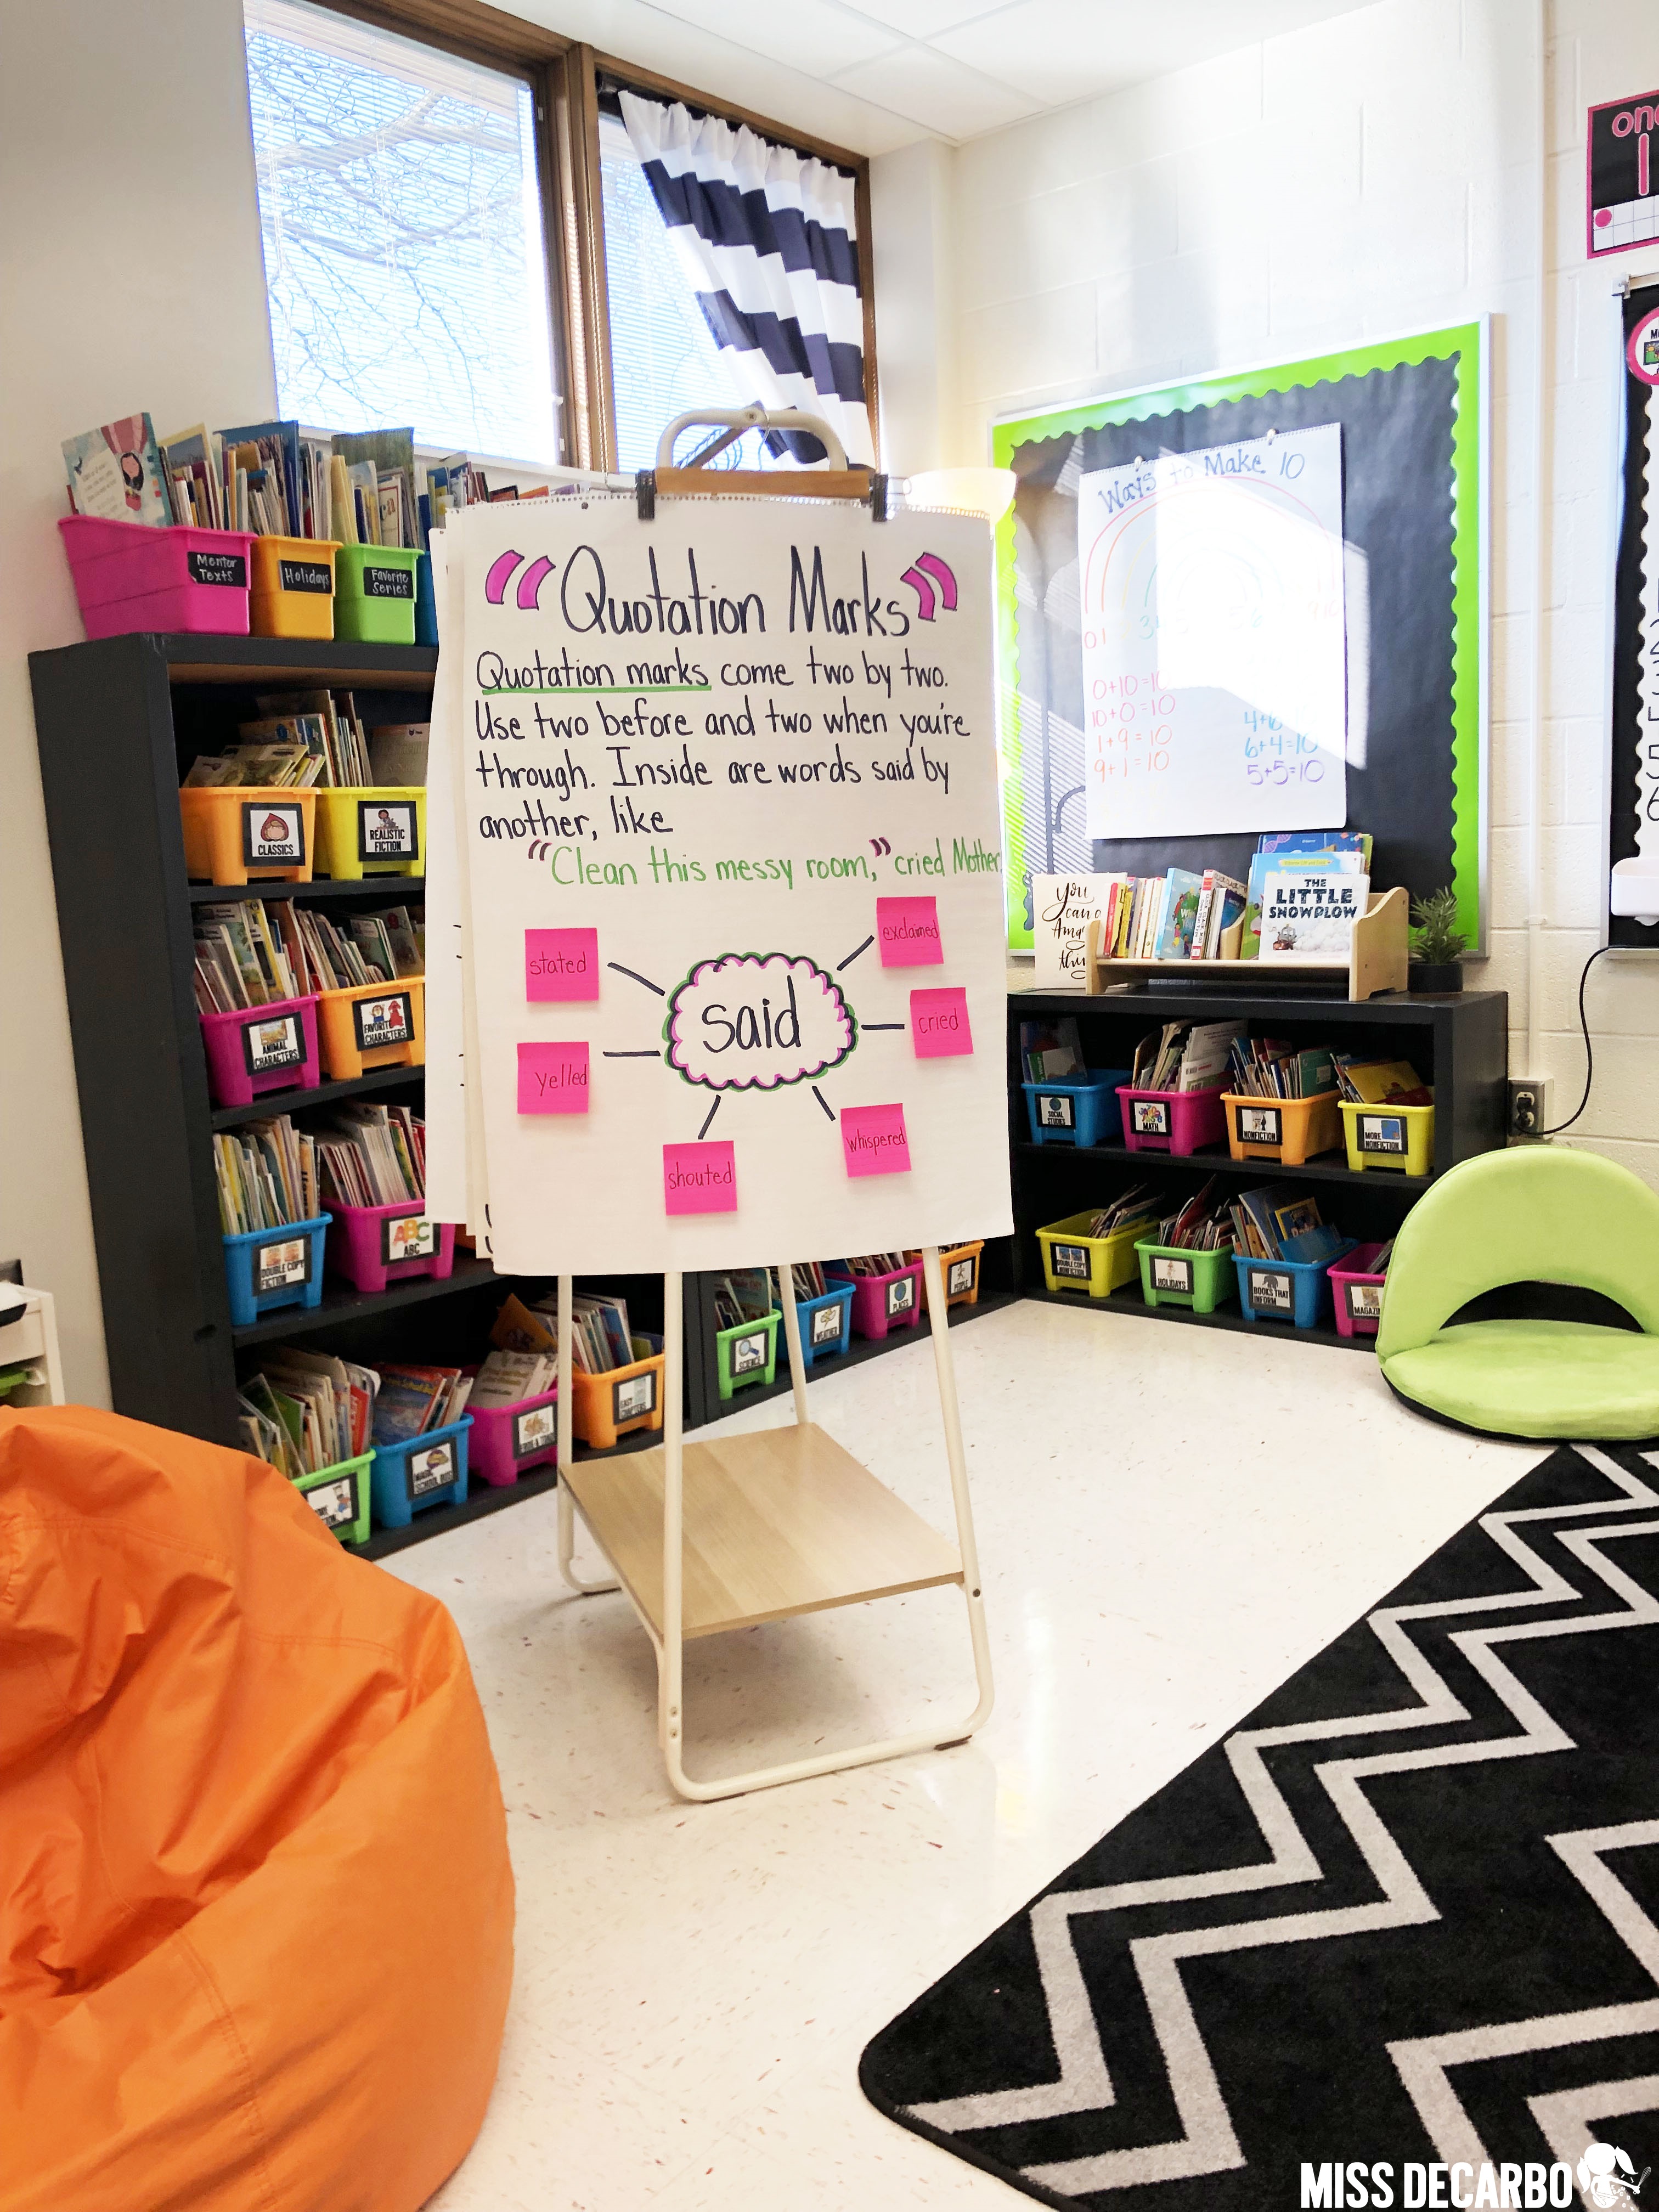 Learn how to use a clothing rack for storing and displaying anchor charts and posters. This is a classroom organization must-have!